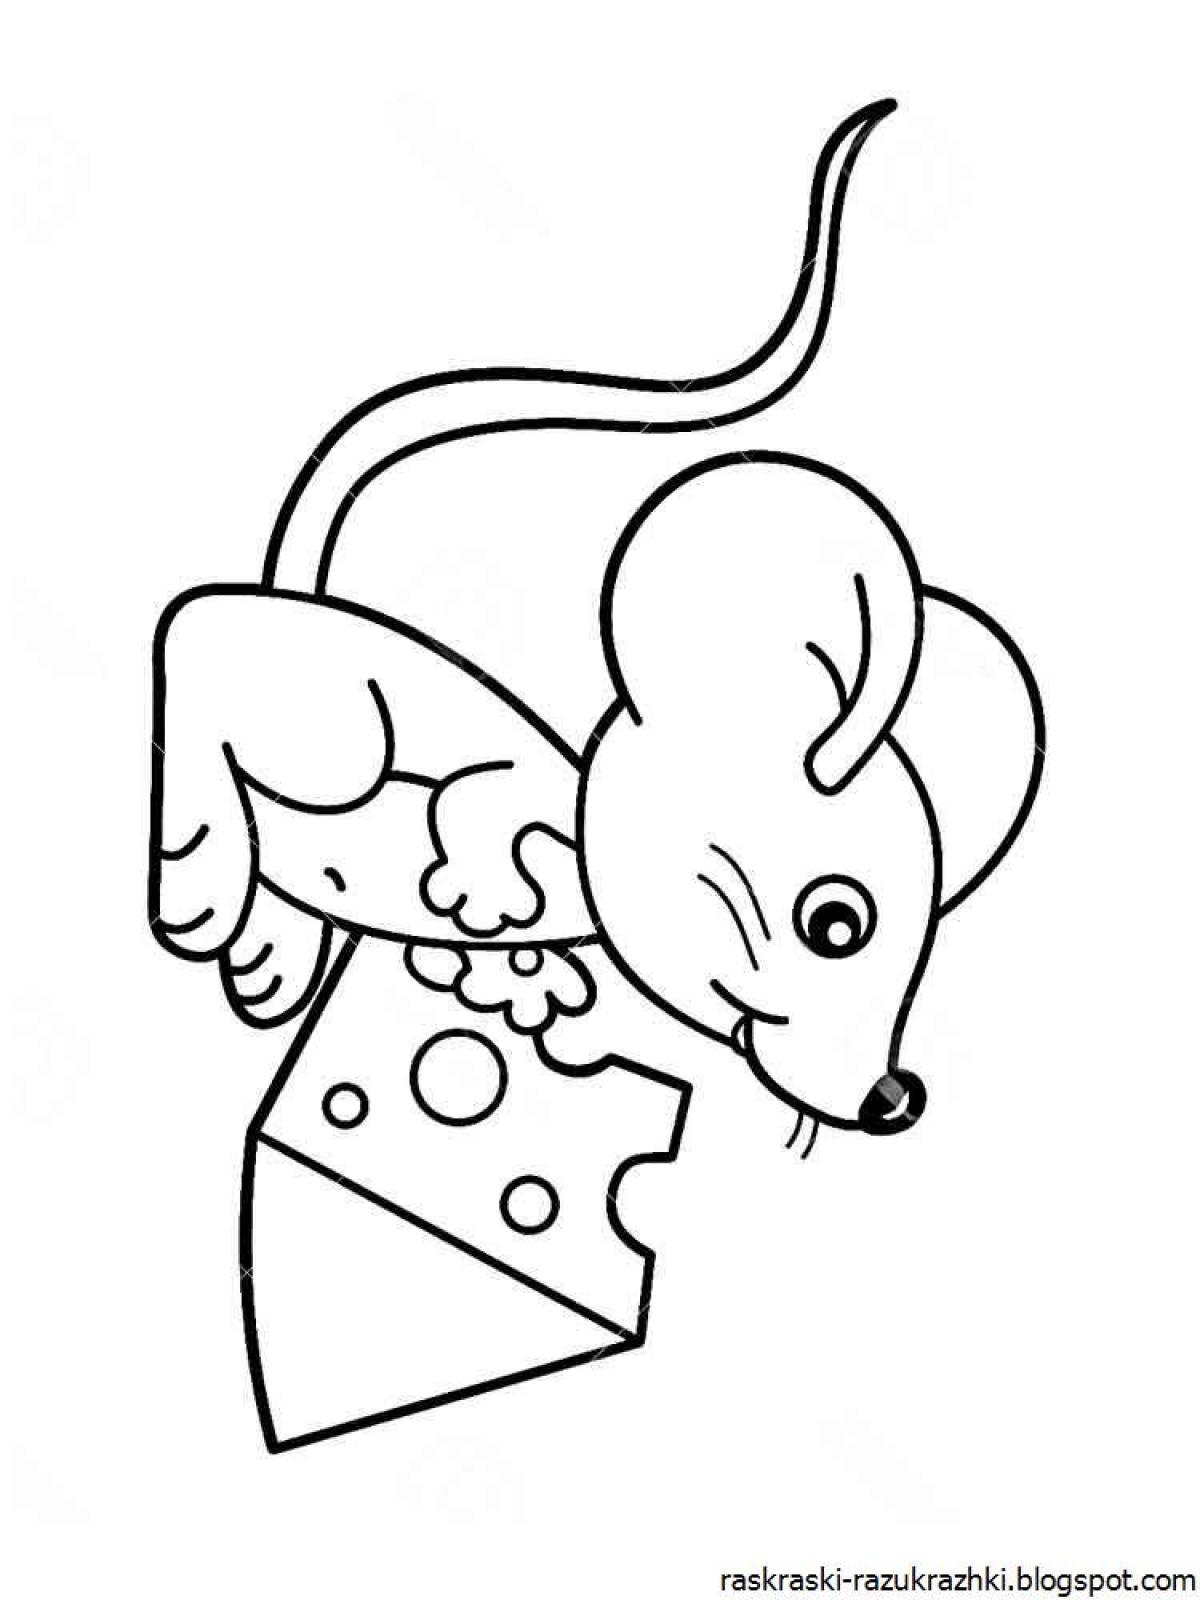 Great coloring mouse